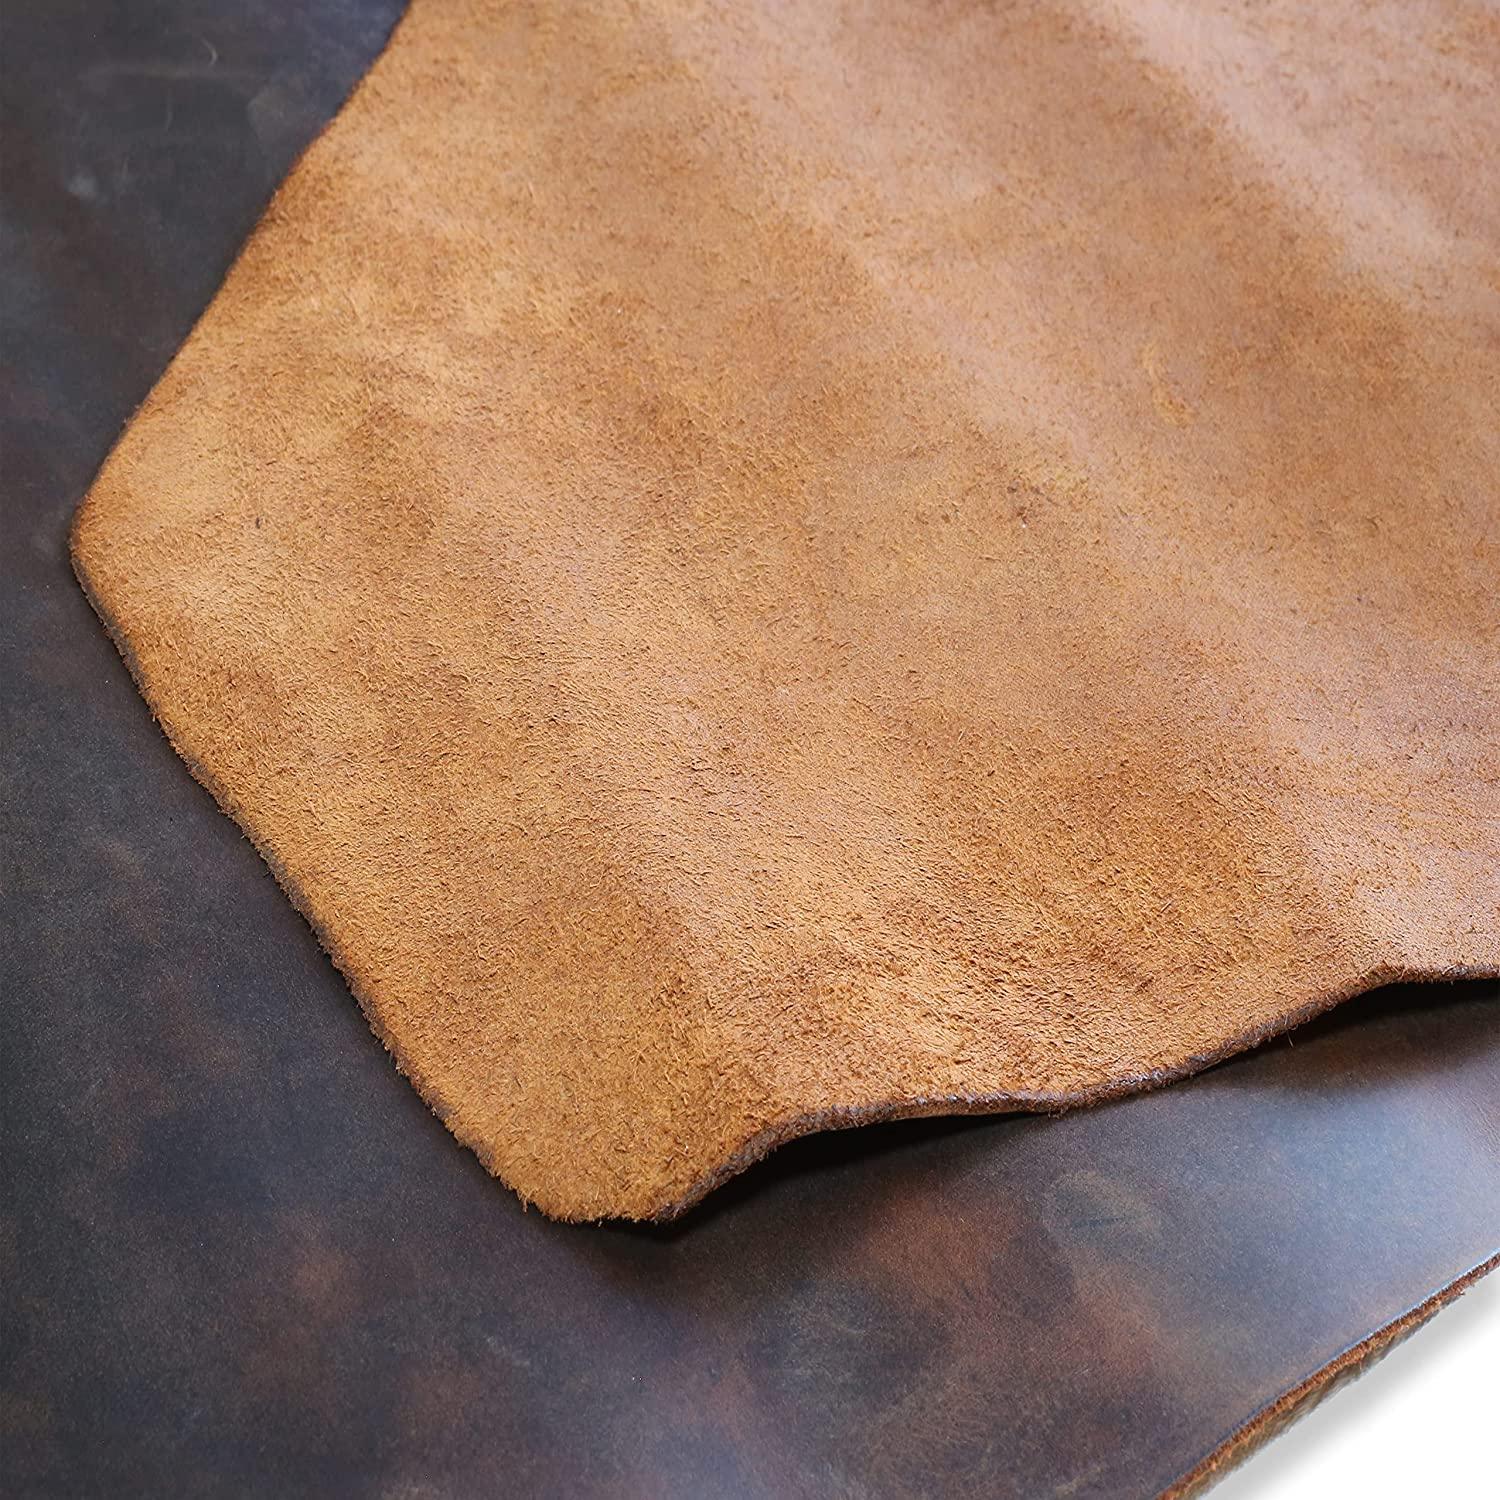 15 Leather sheets, ramdom assortment of selected PRE-CUT leather pieces,  mix italian leather scraps, for crafts, 12x12 approx